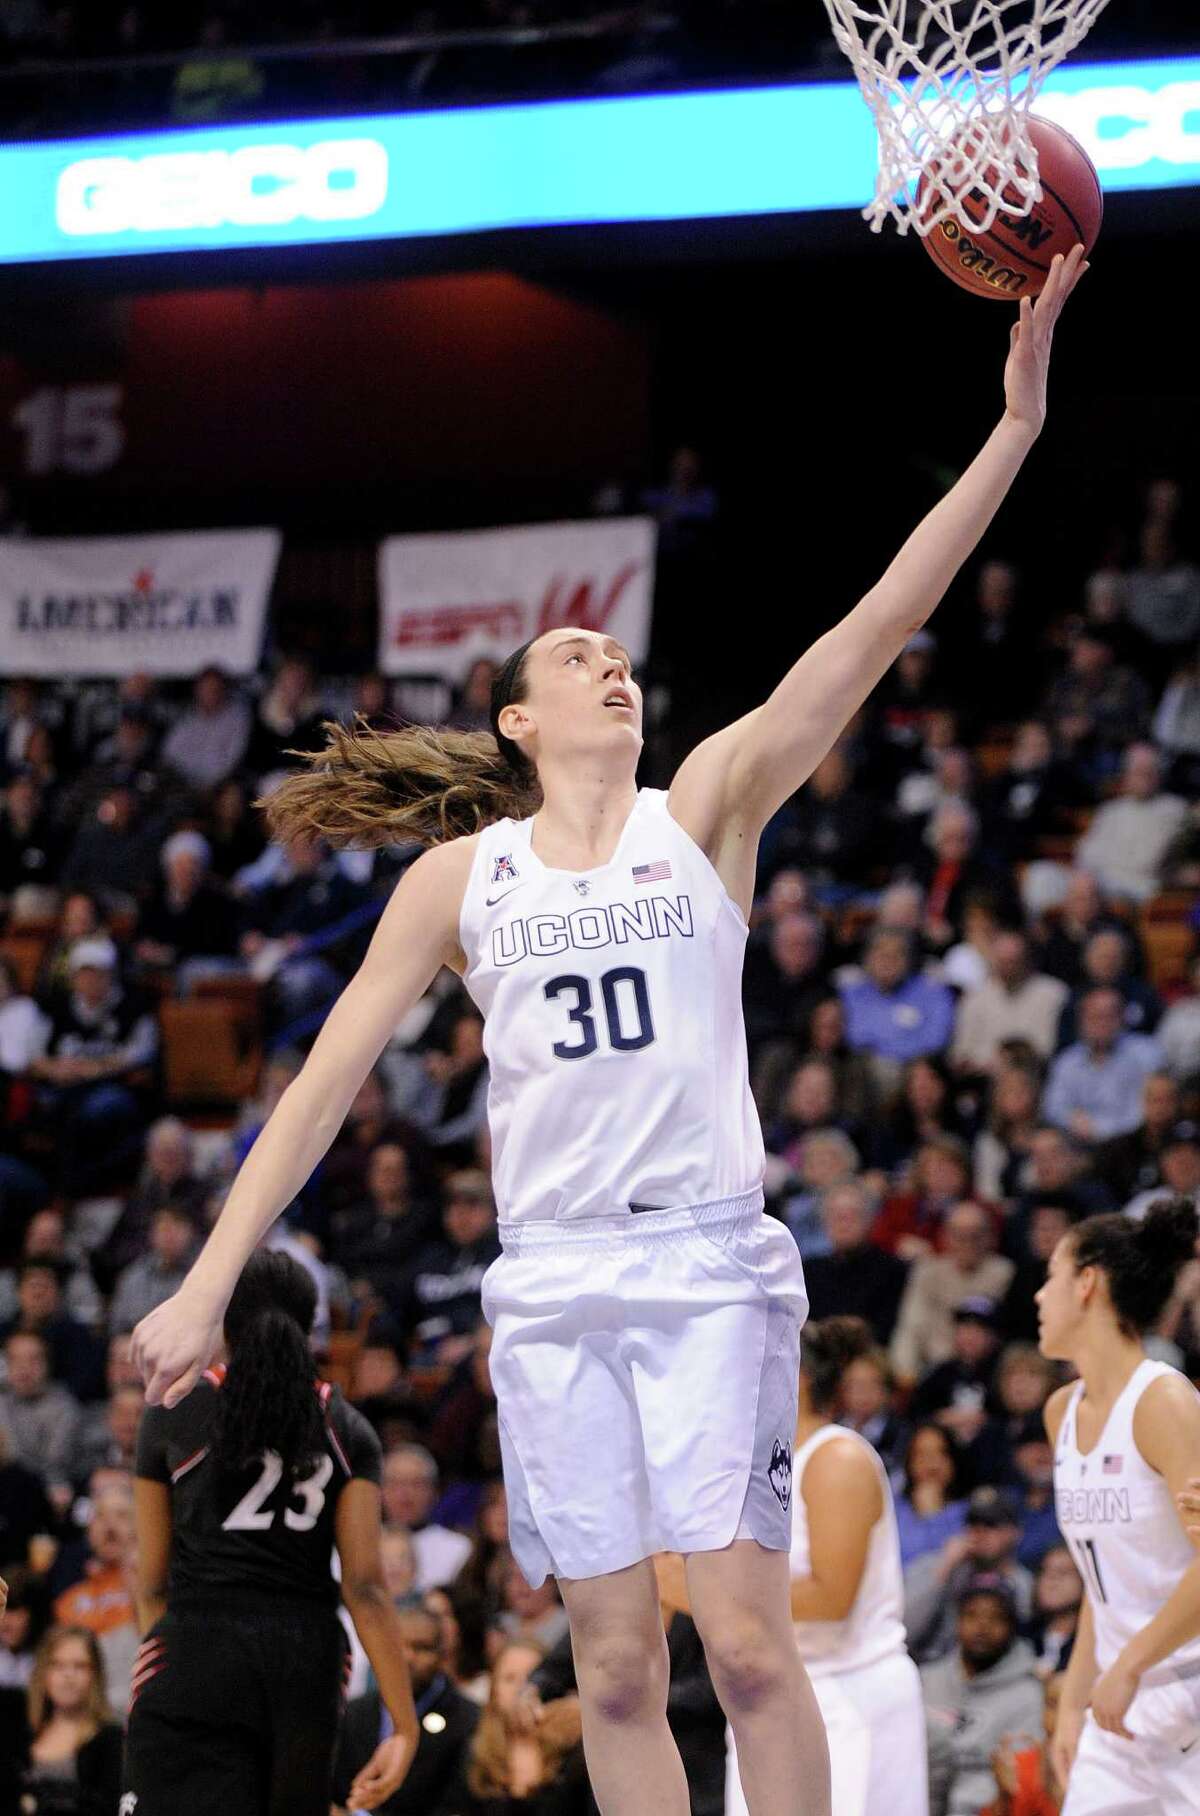 Connecticut's Breanna Stewart (30) scores during the first half of an gainst Cincinnati in the quarterfinals of the American Athletic Conference tournament in Uncasville, Conn., on Saturday, March 7, 2015. (AP Photo/Fred Beckham) ORG XMIT: CTFB105